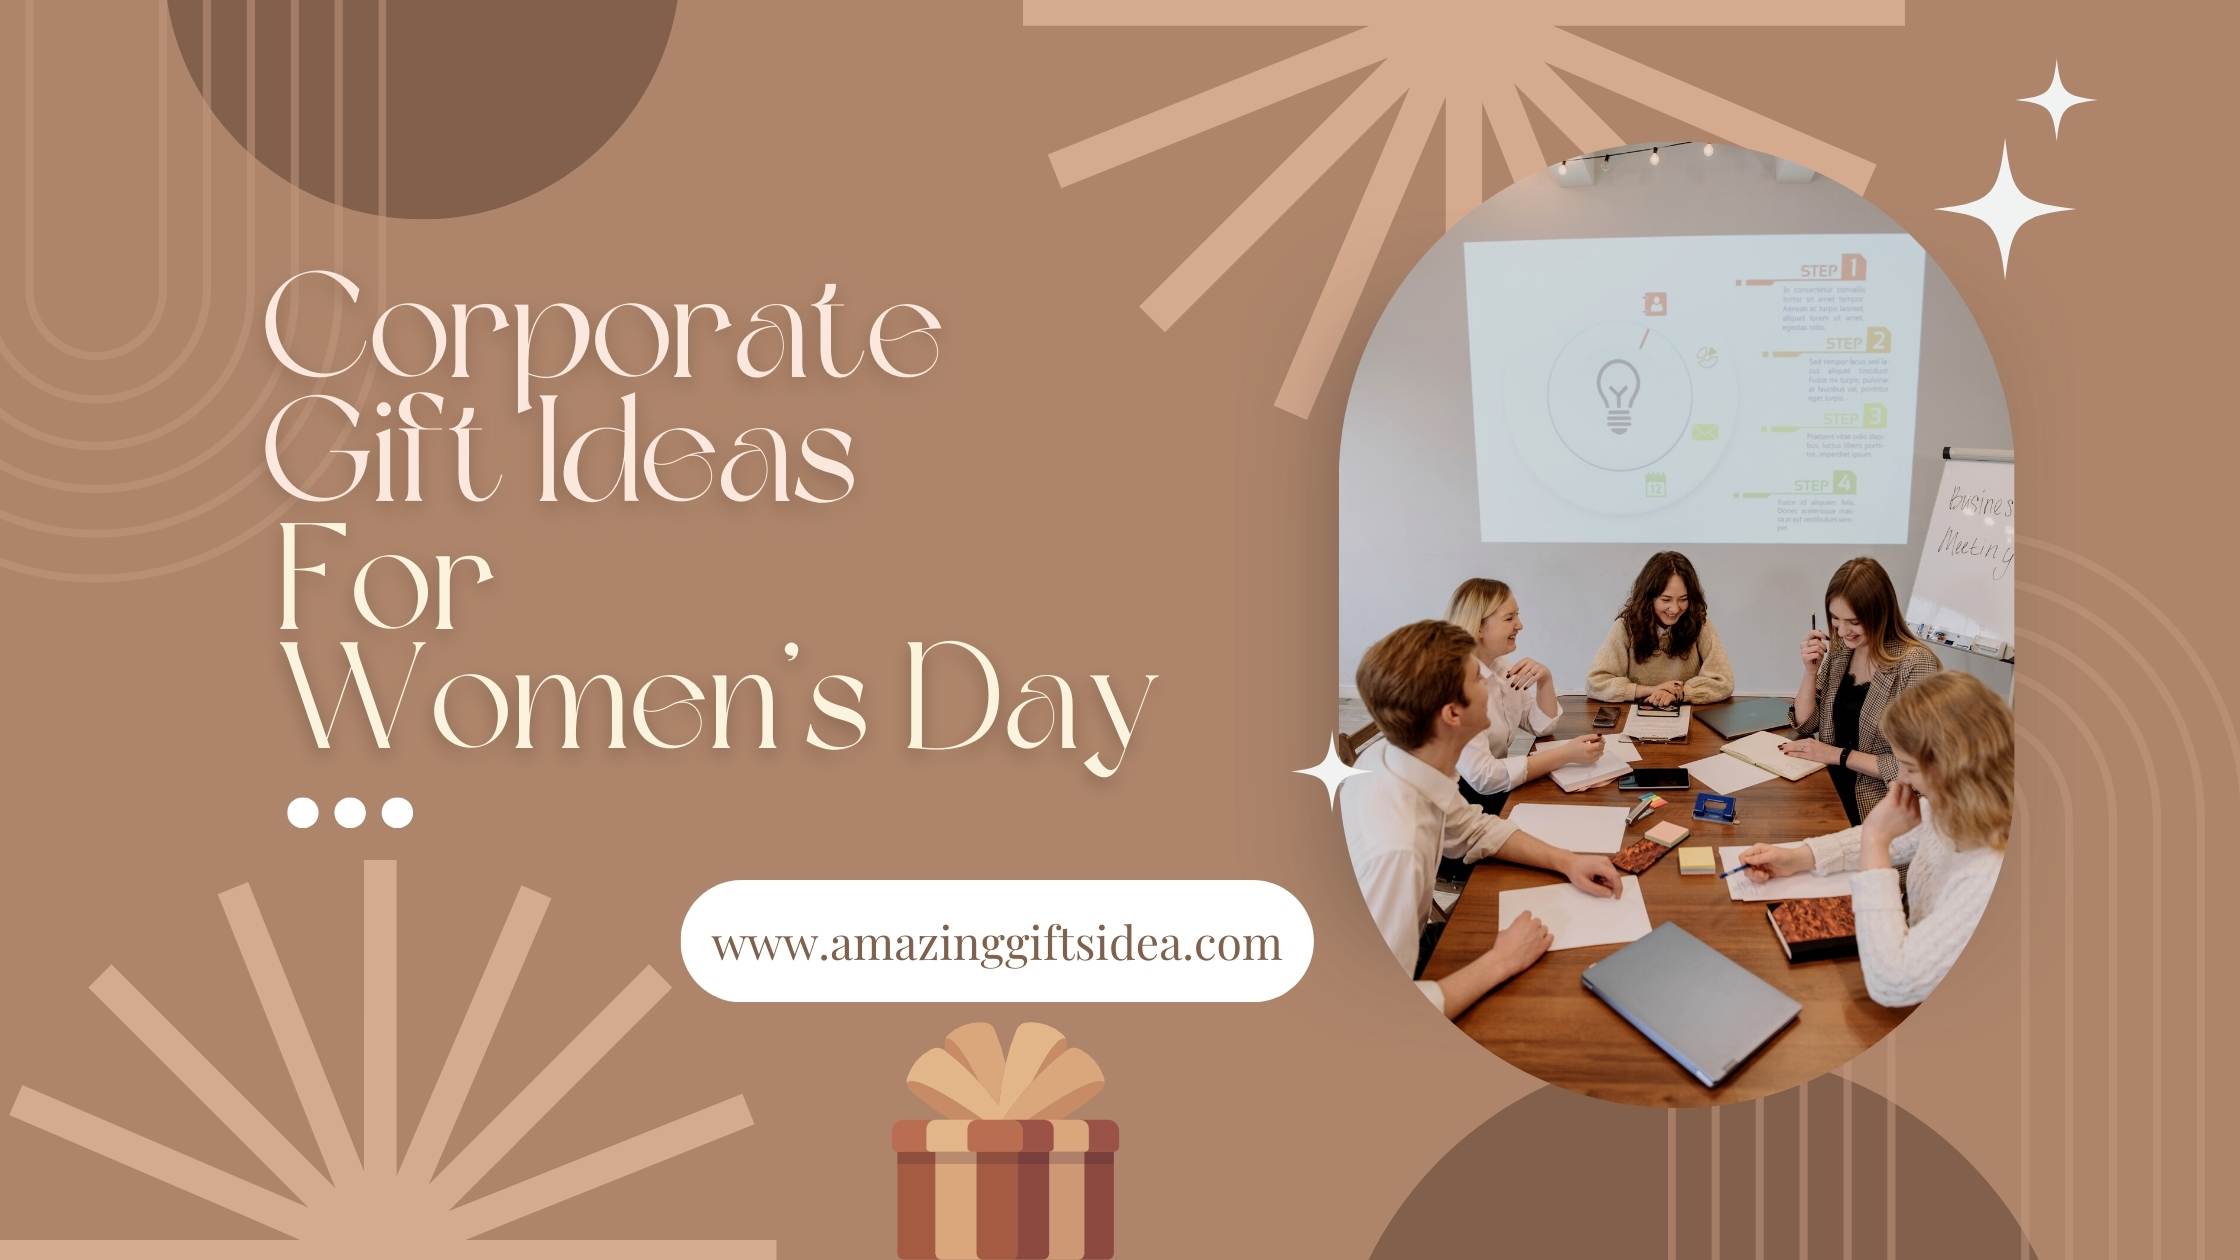 Women’s Day Corporate Gift Ideas For Employees